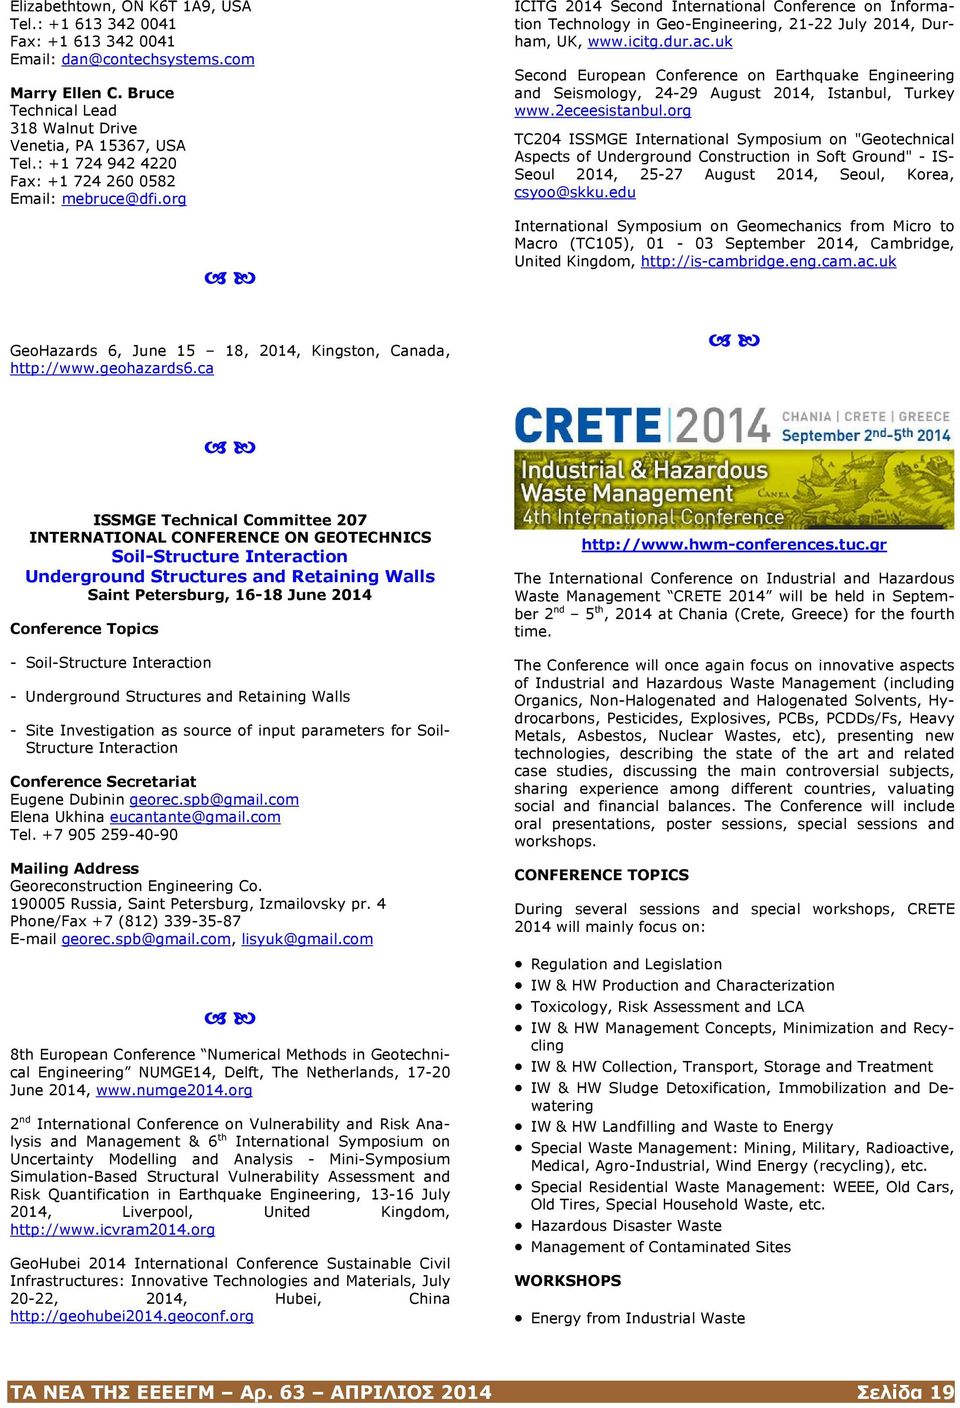 uk Second European Conference on Earthquake Engineering and Seismology, 24-29 August 2014, Istanbul, Turkey www.2eceesistanbul.